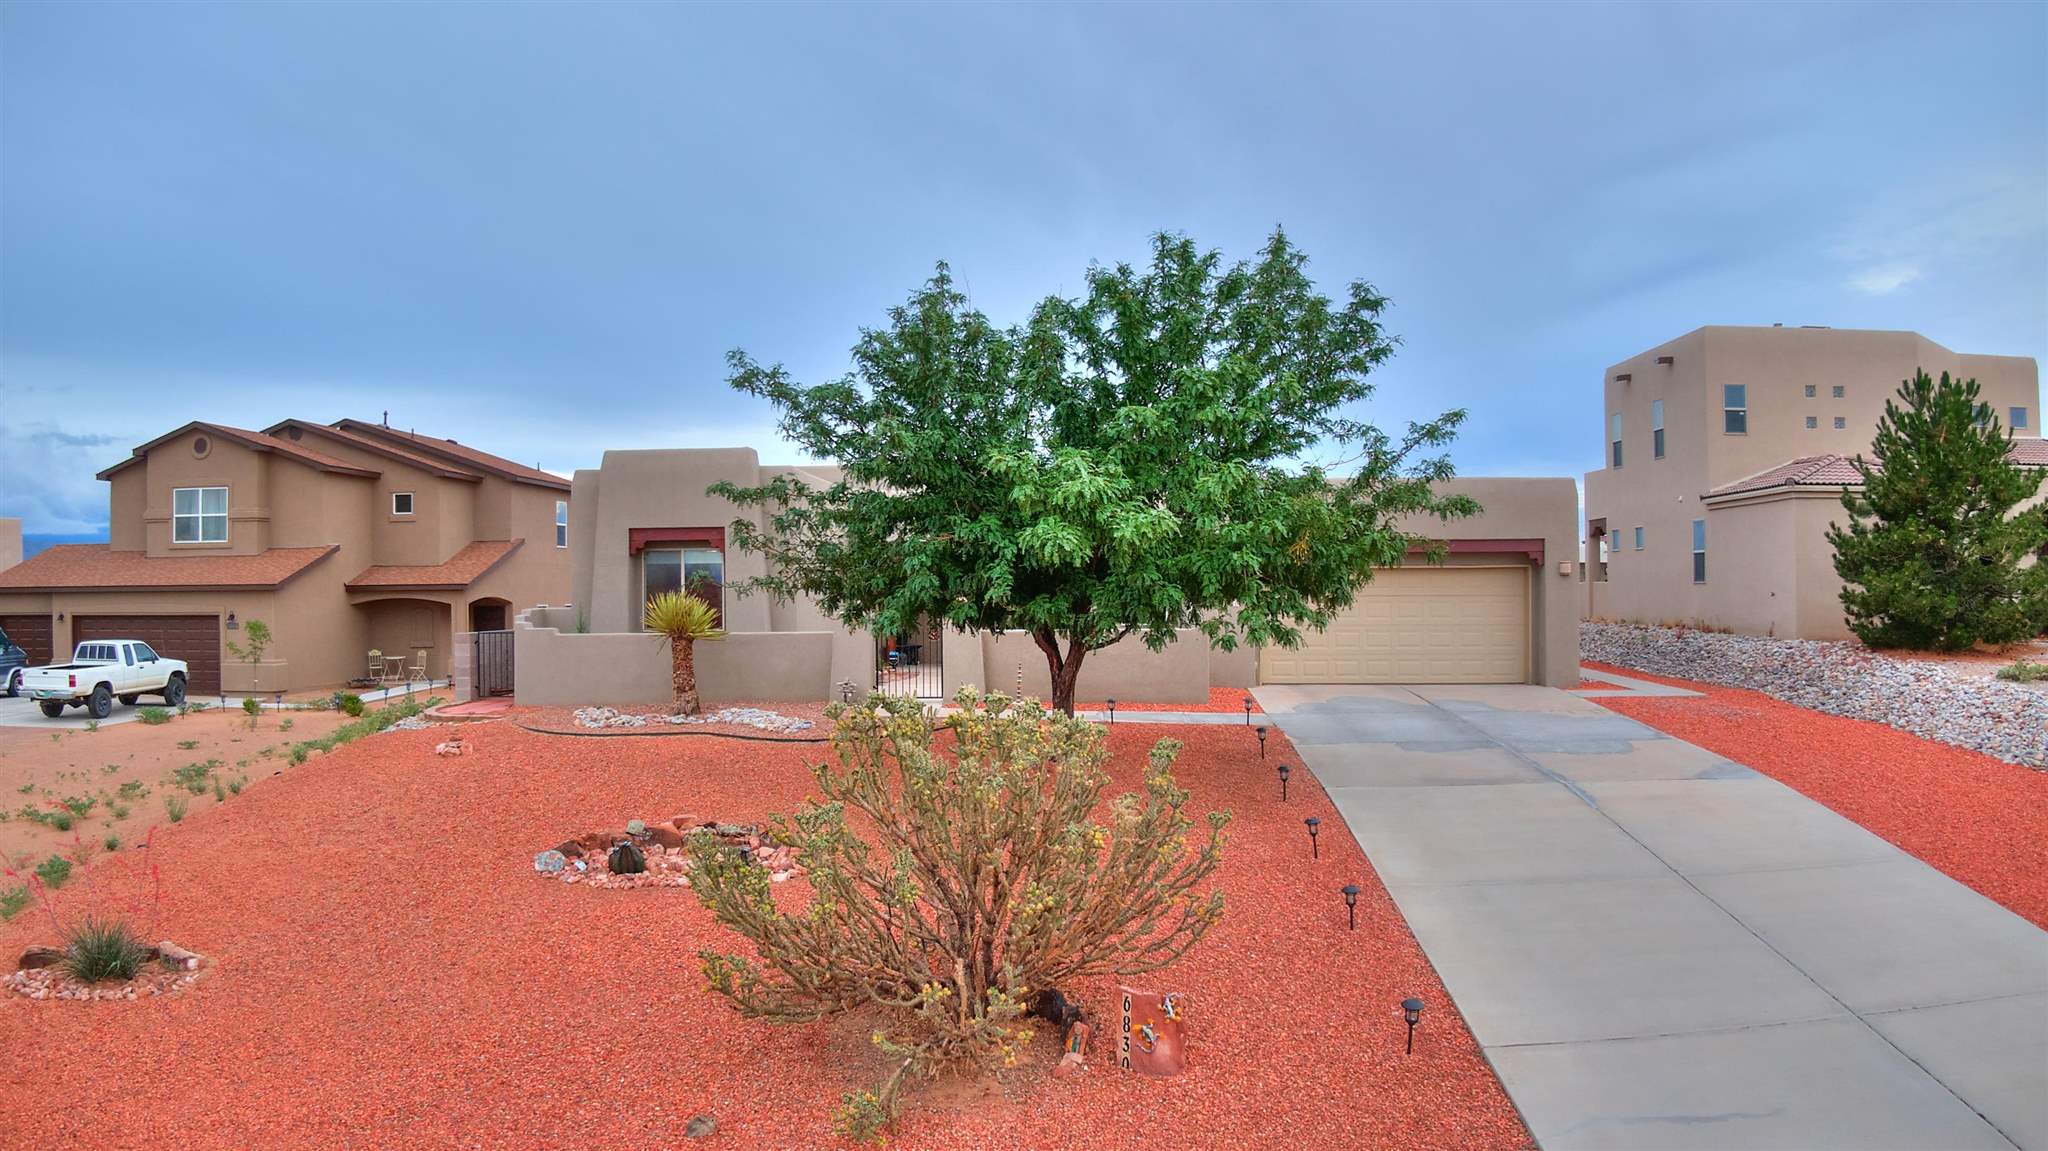 6830 Oersted, Rio Rancho, New Mexico 87144, 3 Bedrooms Bedrooms, ,2 BathroomsBathrooms,Residential,For Sale,6830 Oersted,202102907